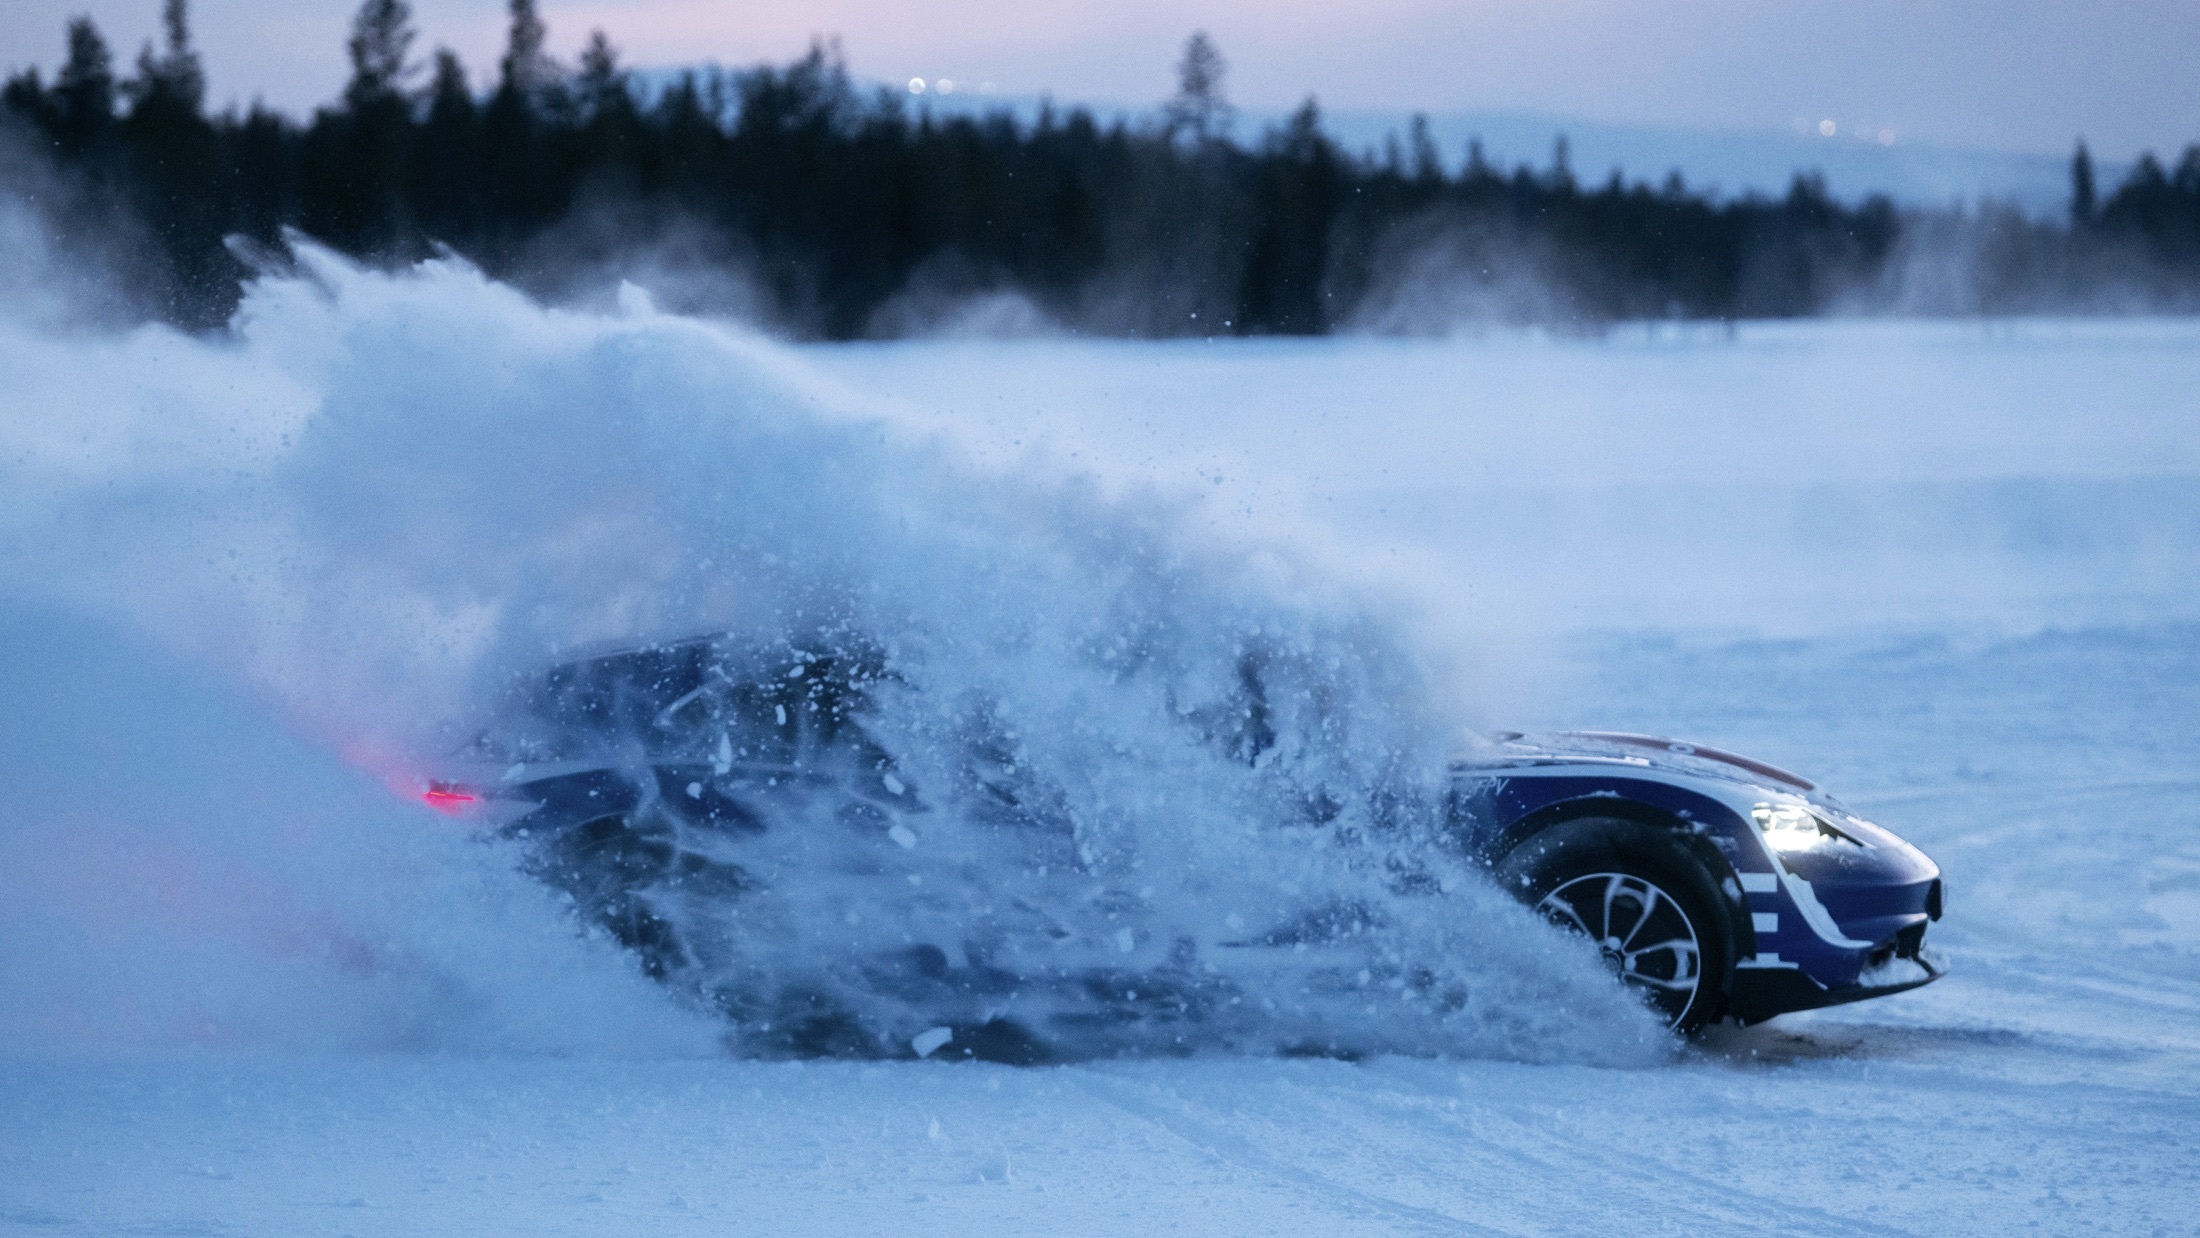 Porsche Taycan drifting in the snow, forest in background